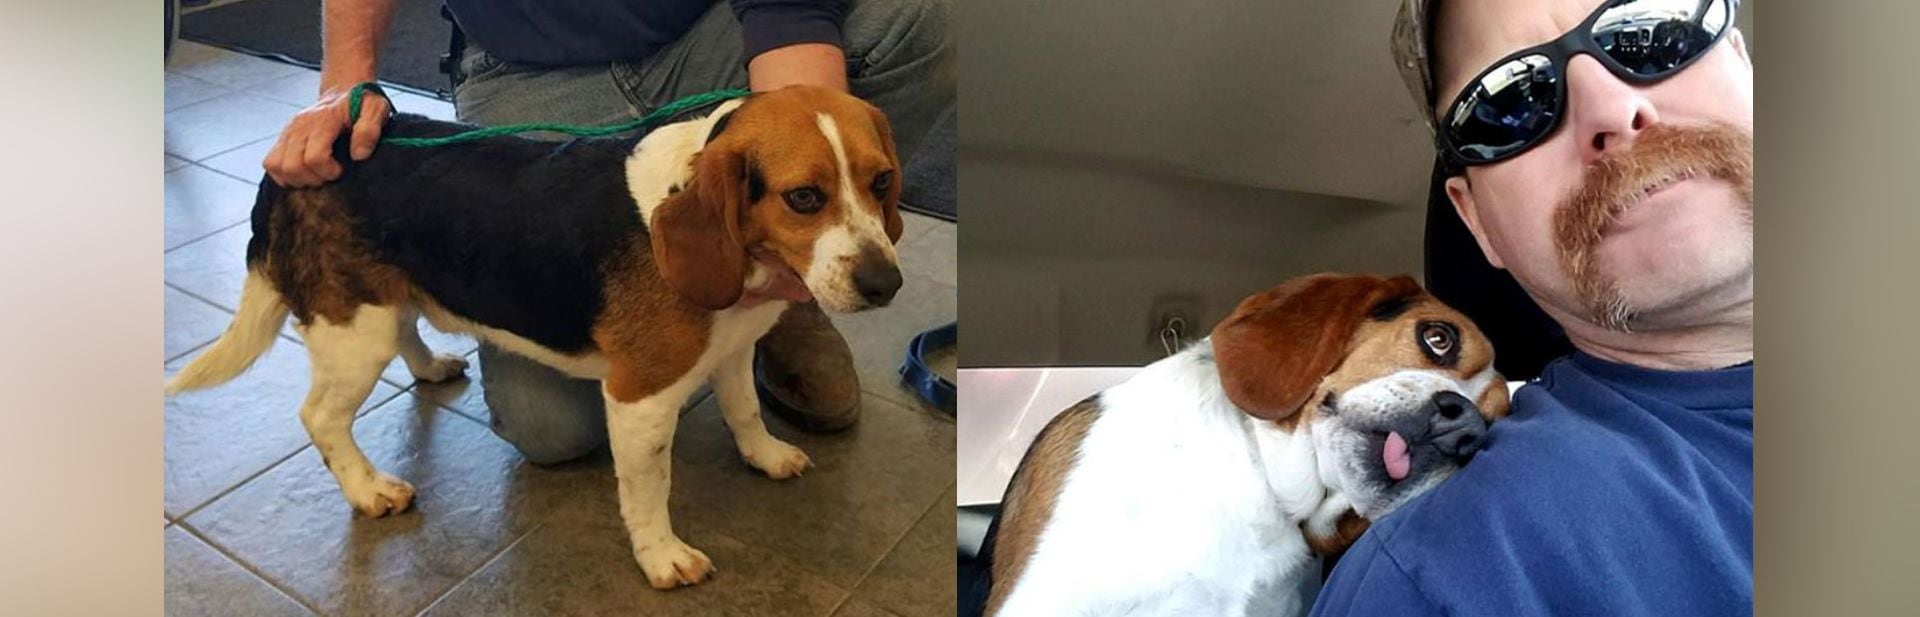 Beagle Facing Euthanasia Gives Sweetest Thank You After Timely Rescue